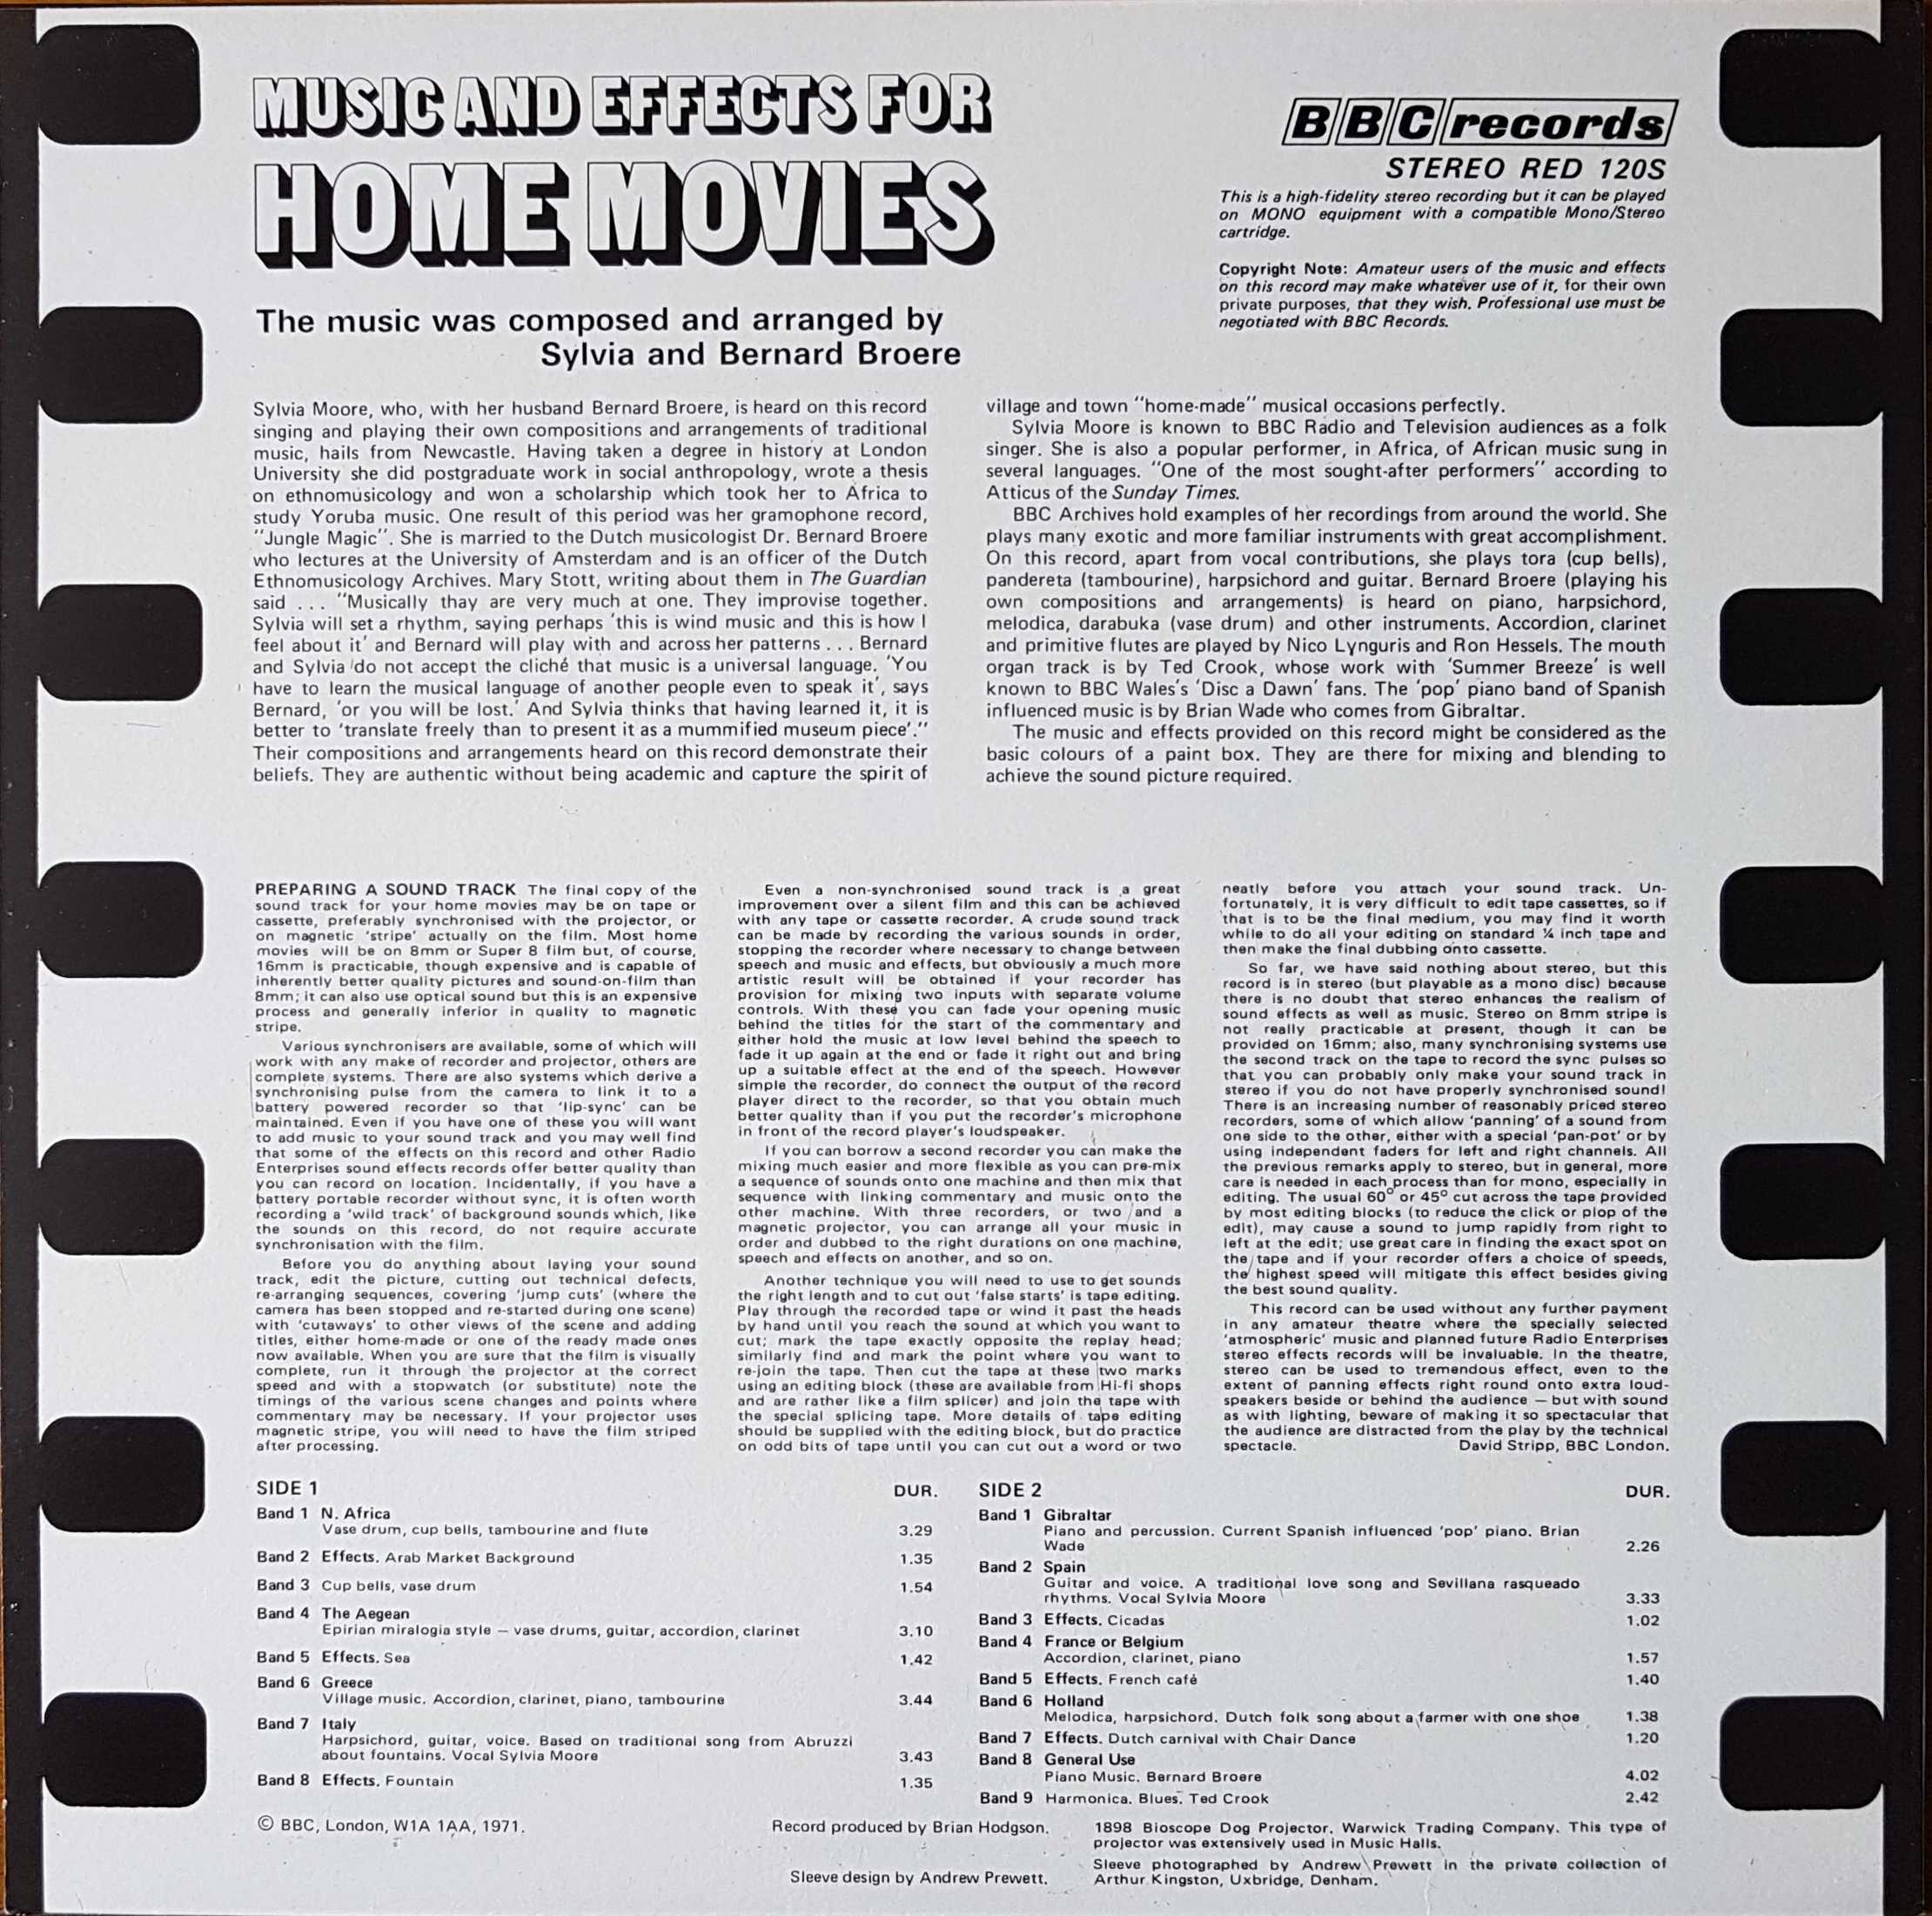 Picture of RED 120 Music and effects for home movies by artist Various from the BBC records and Tapes library